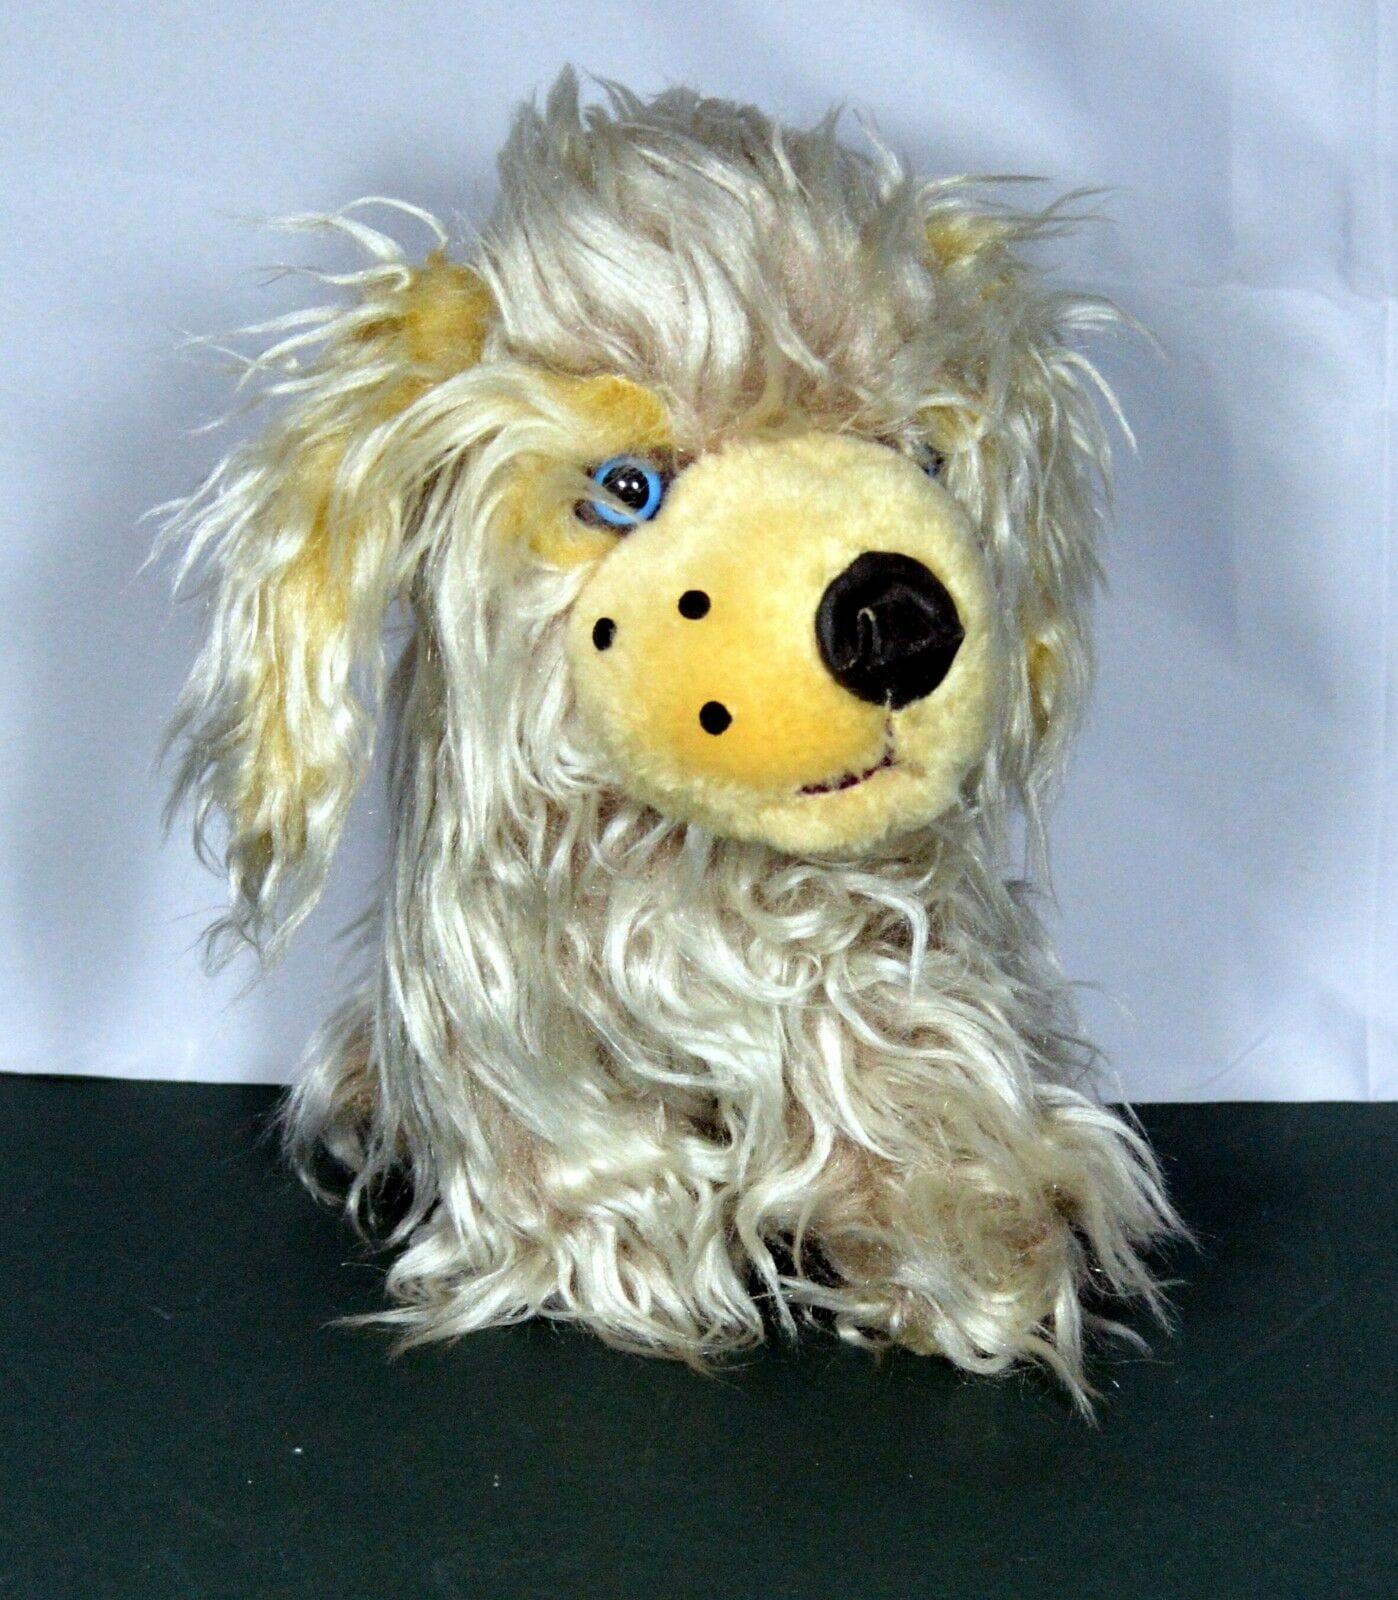 THREE SOFT TOY DOGS A SHAGGY DOG/A DOG IN A TARTAN OUTFIT/A GOLDEN BROWN DOG(PREVIOUSLY OWNED)GOOD CONDITION - TMD167207